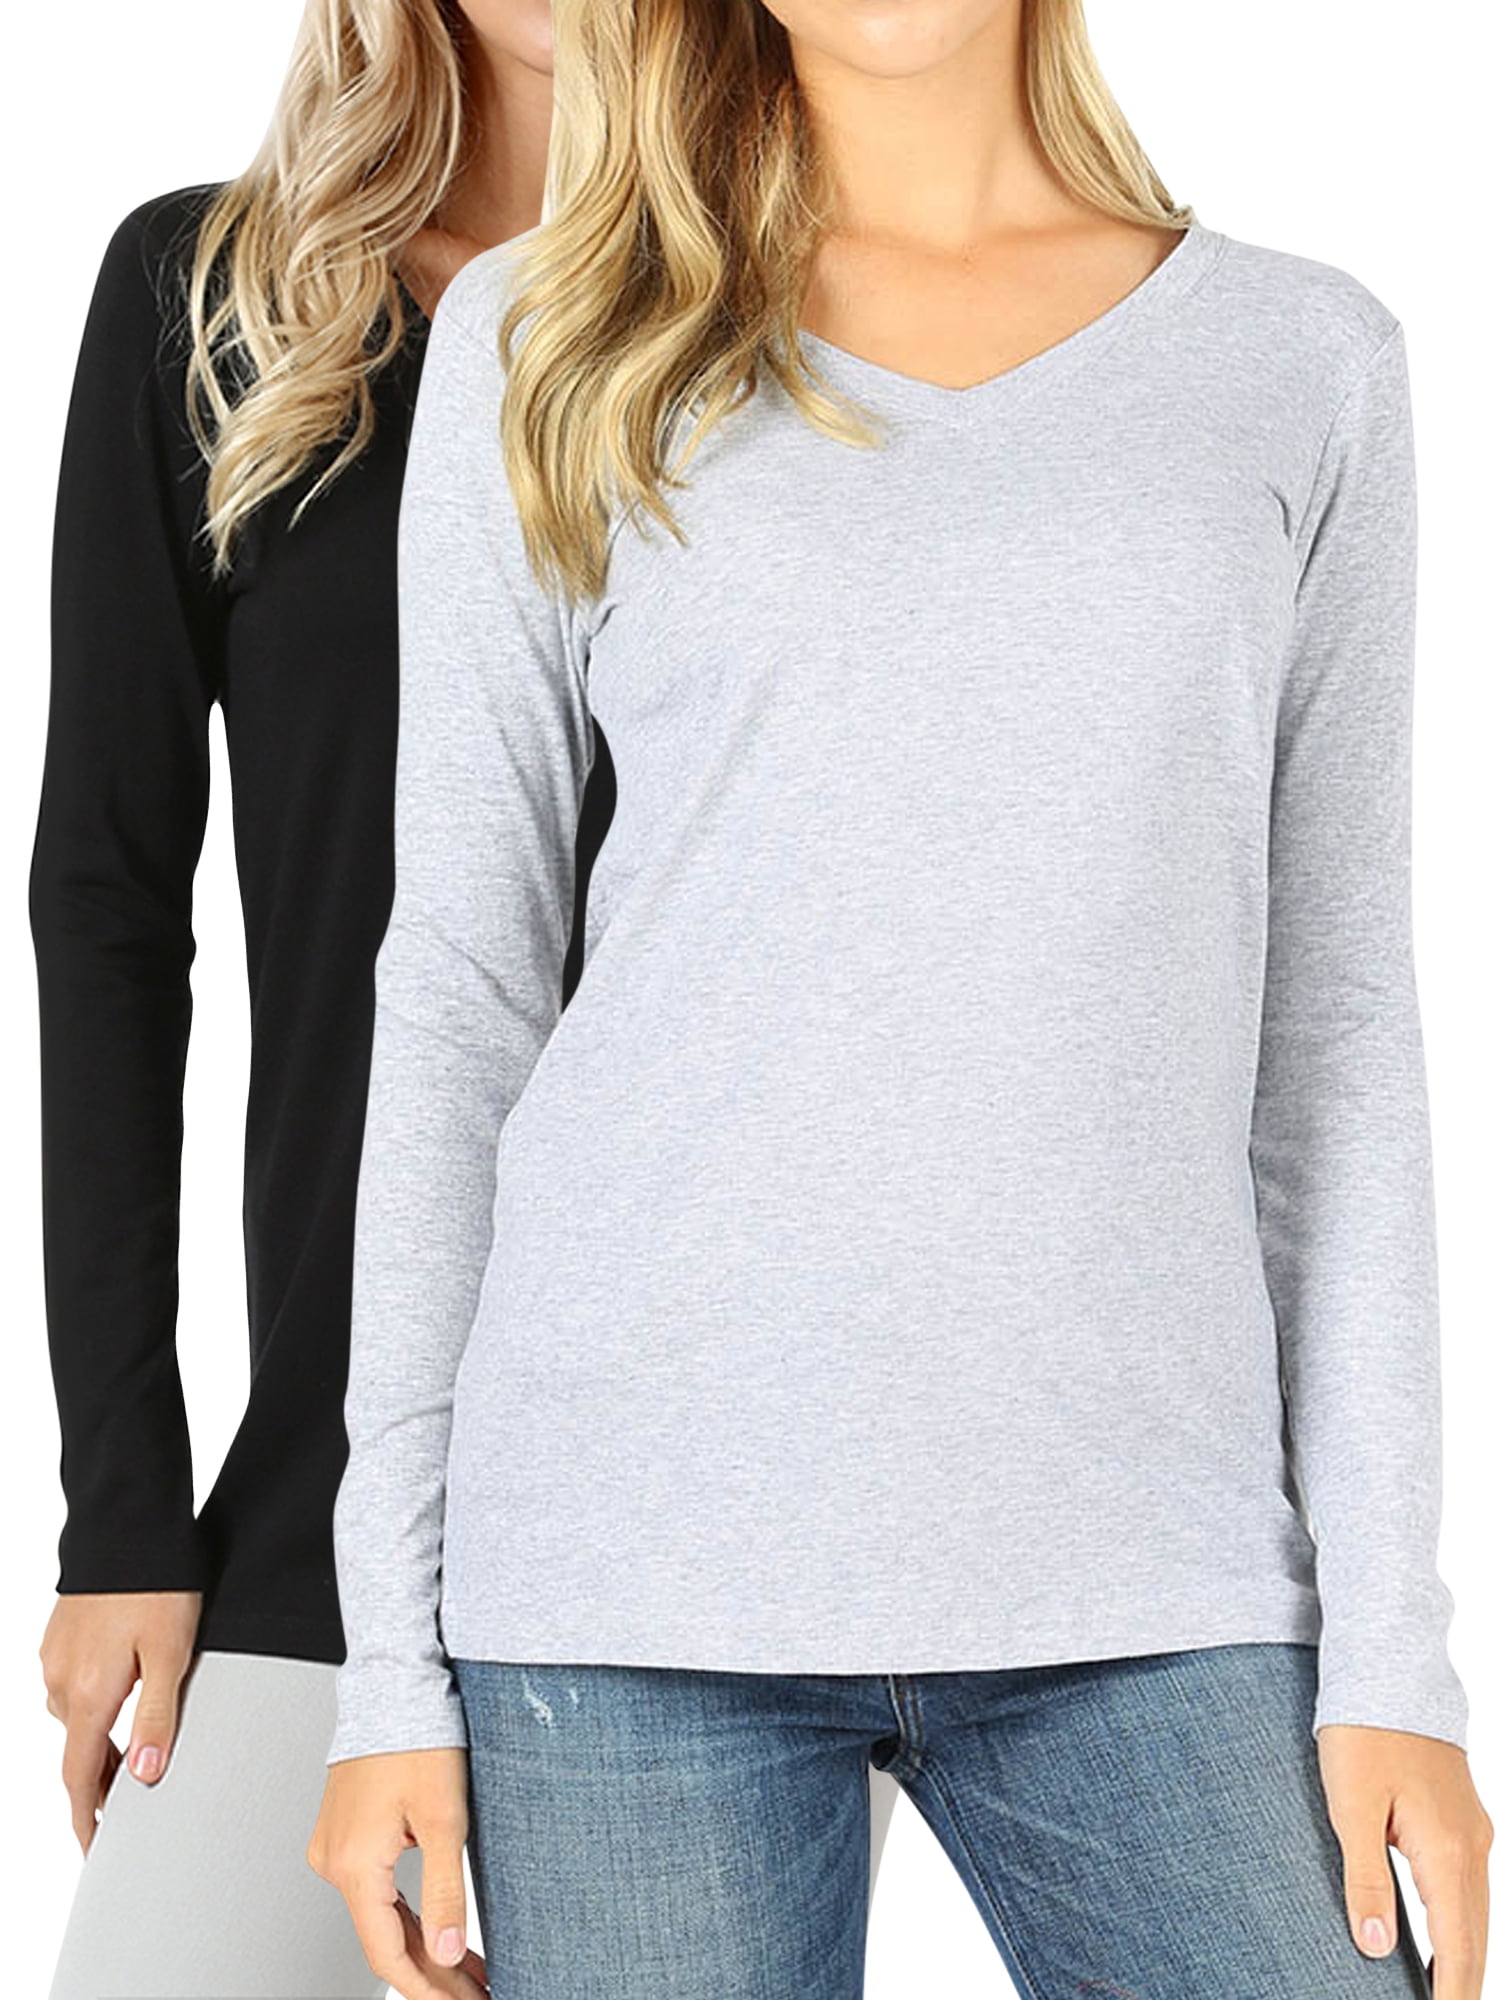 TheLovely - Women Casual Basic Cotton Loose Fit V-Neck Long Sleeve T ...